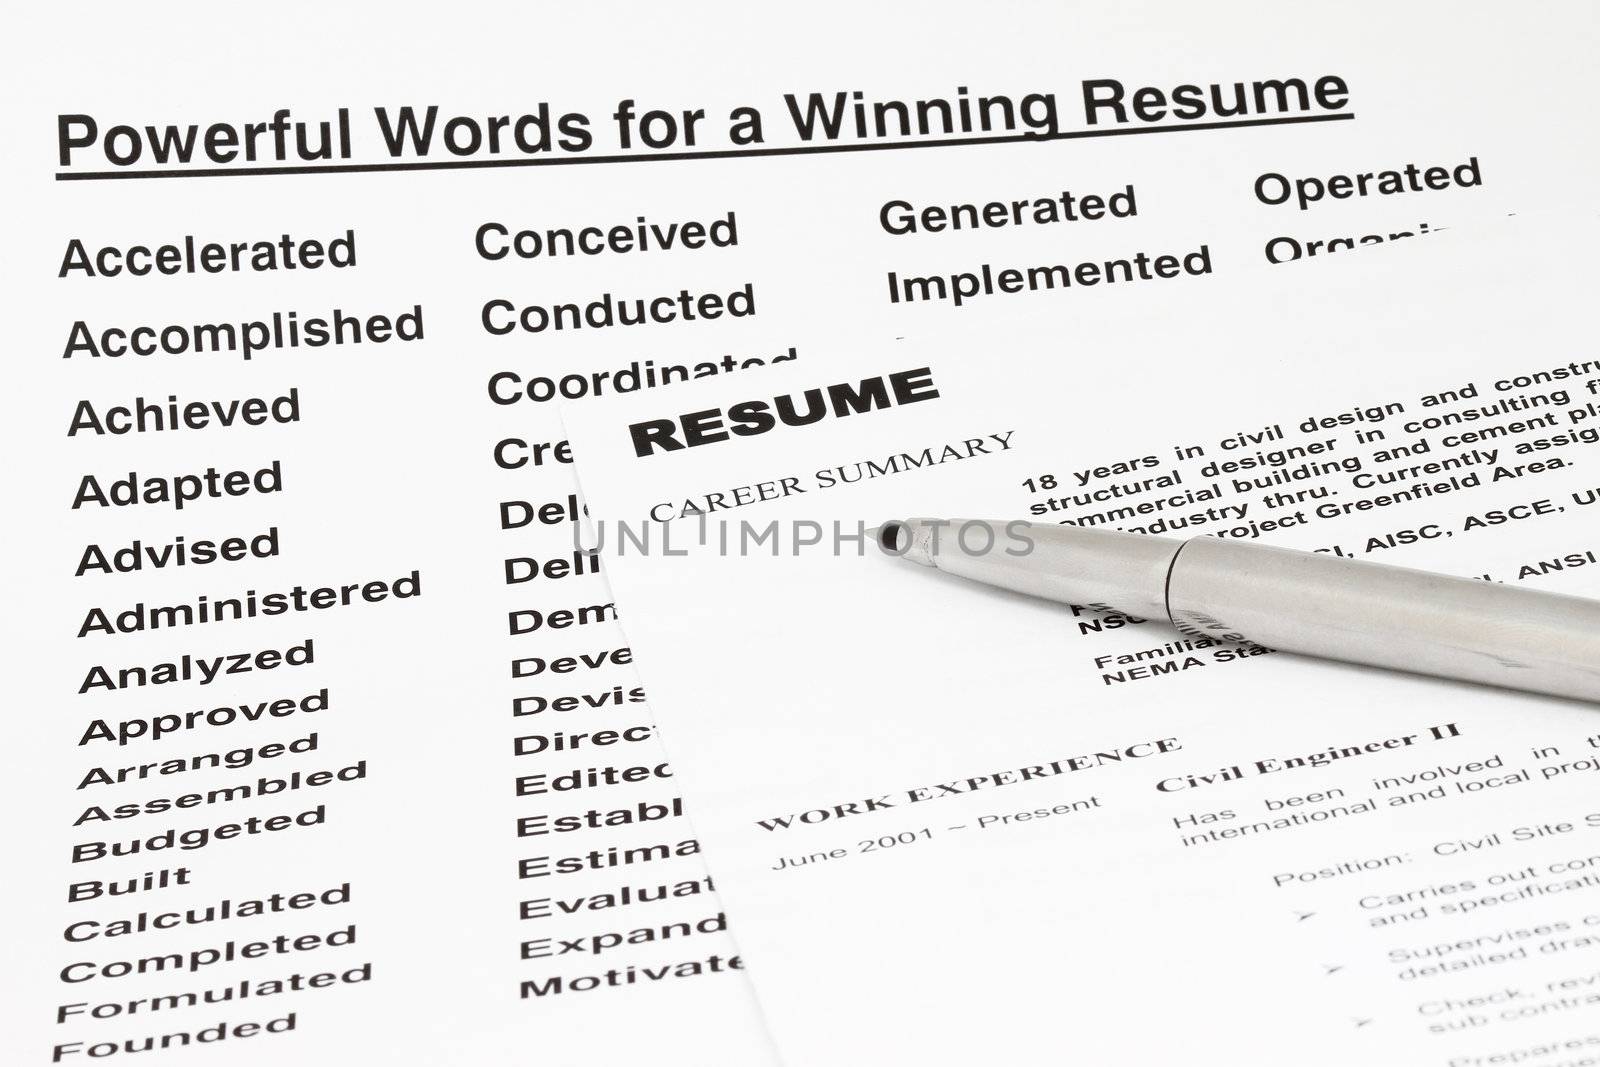 Powerful words for winning resume by sacatani